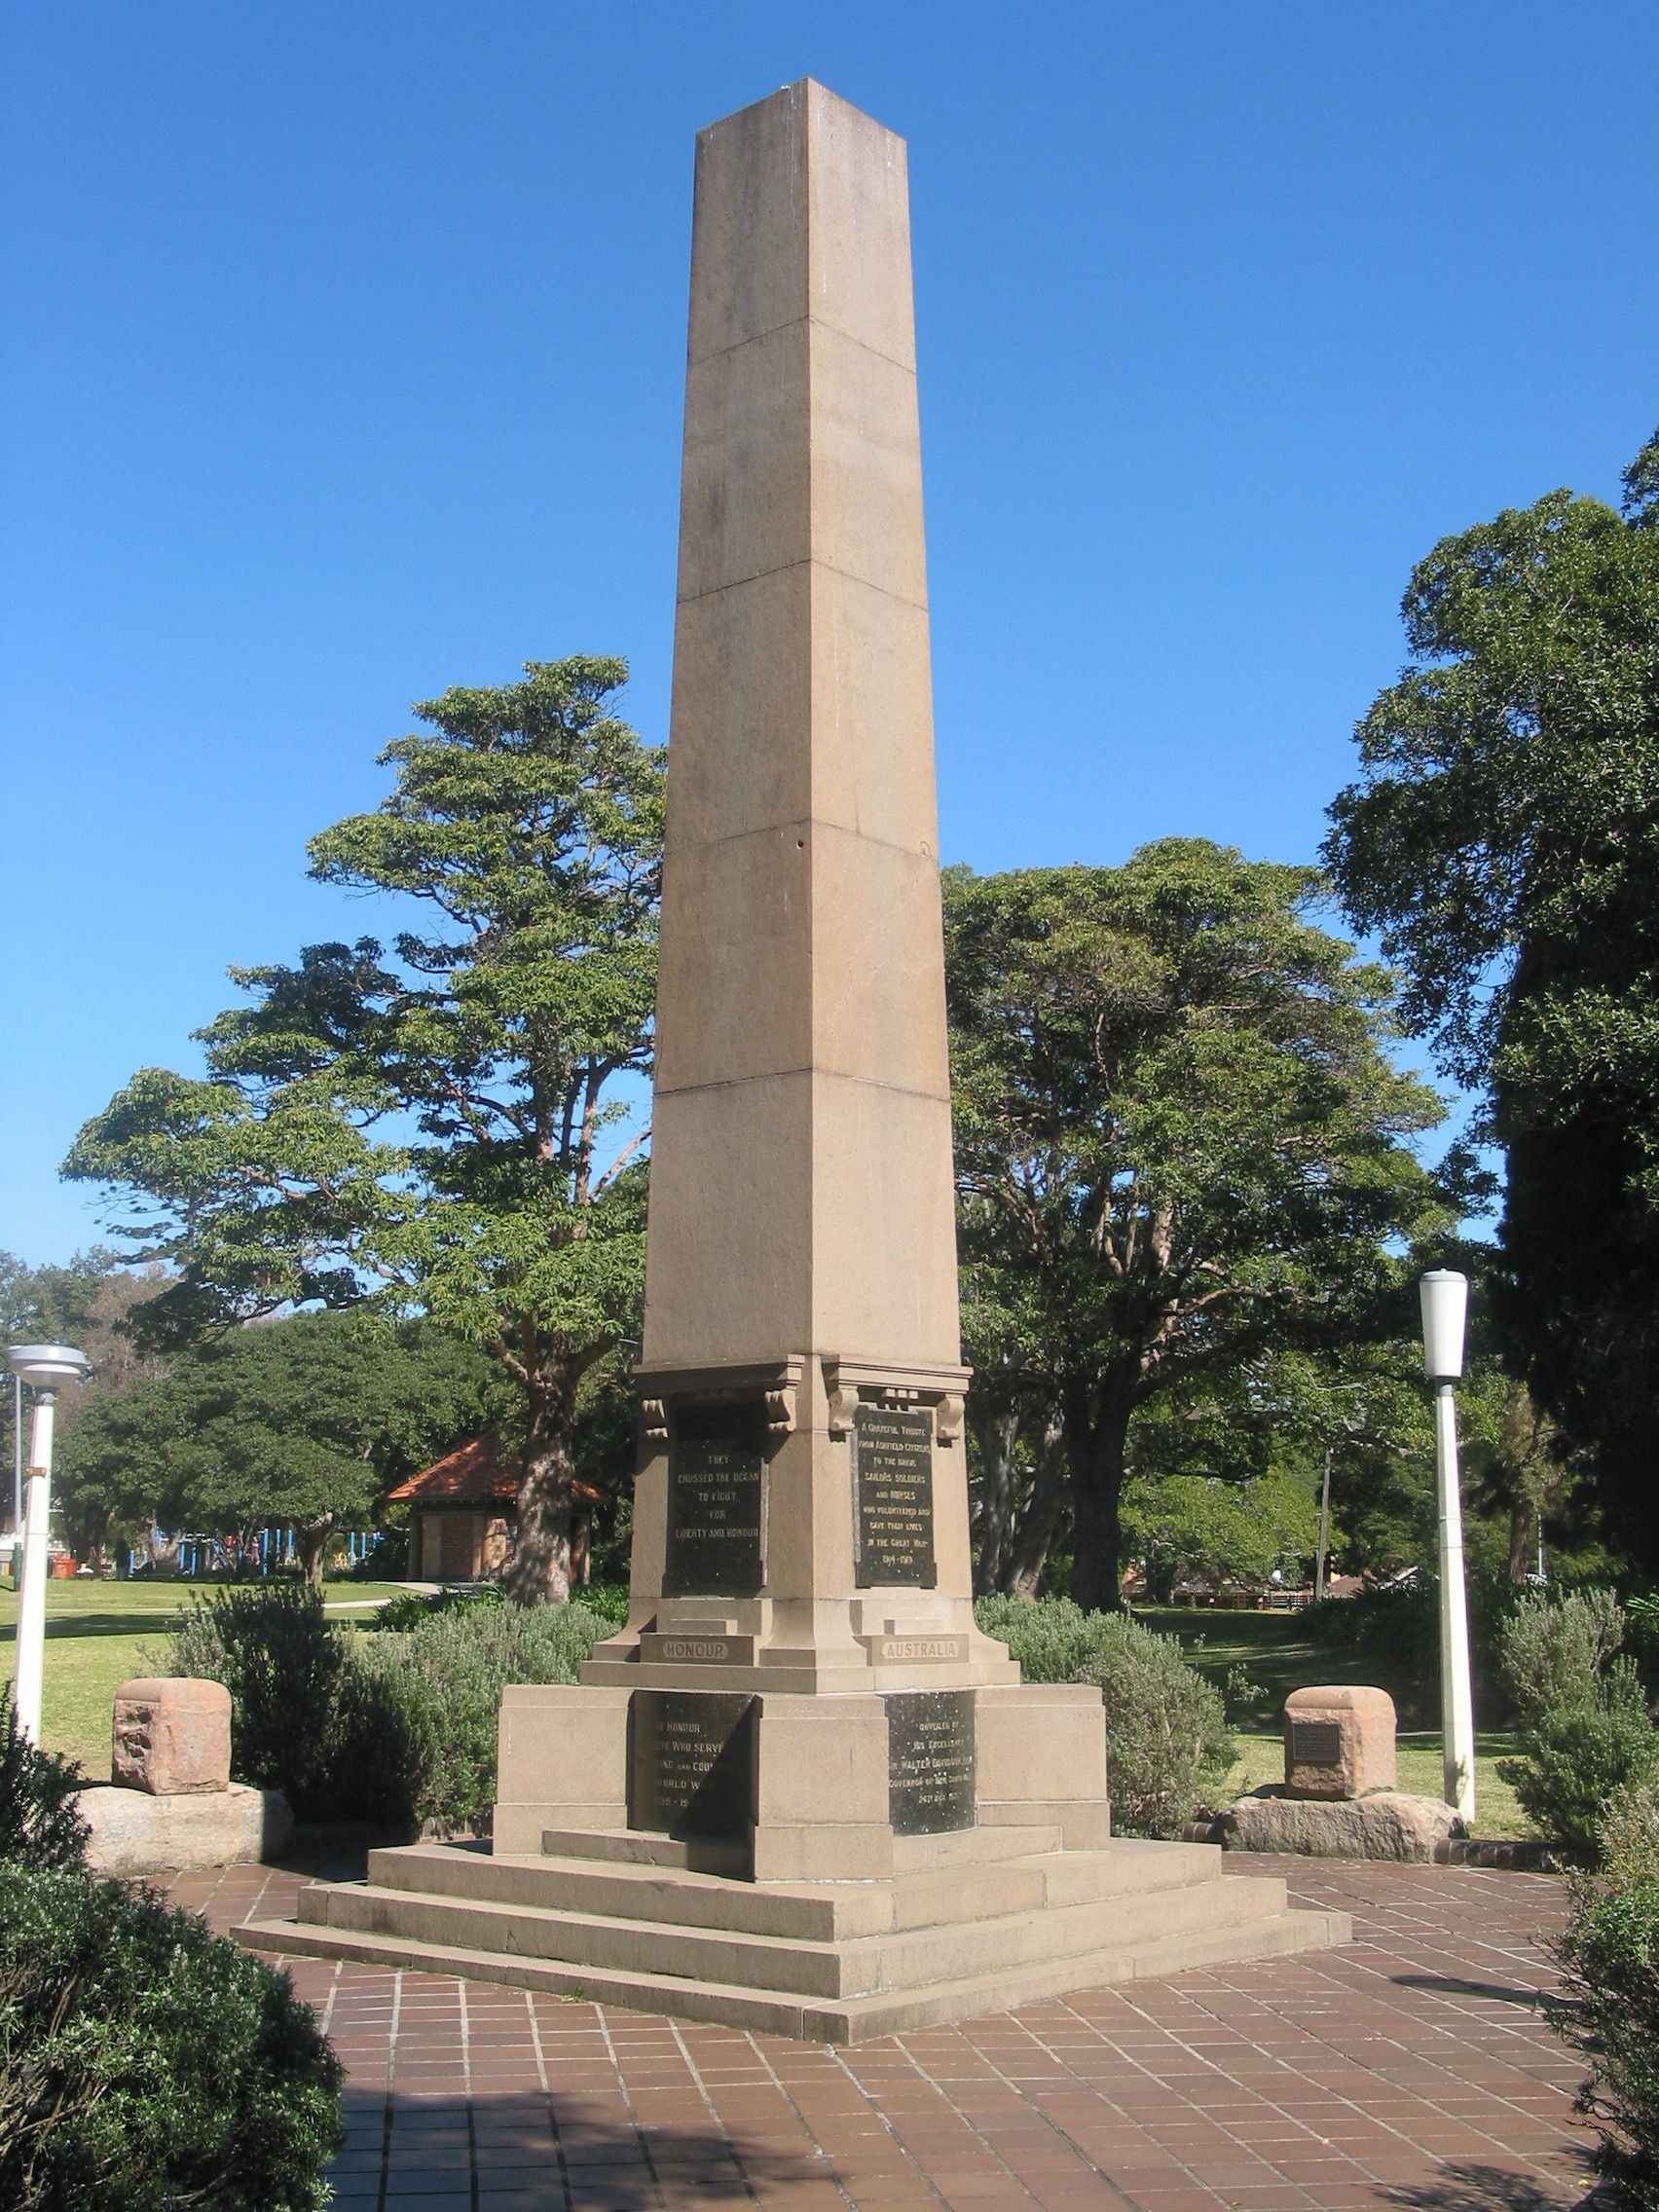 Register of War Memorials in New South Wales | Military Research for ...